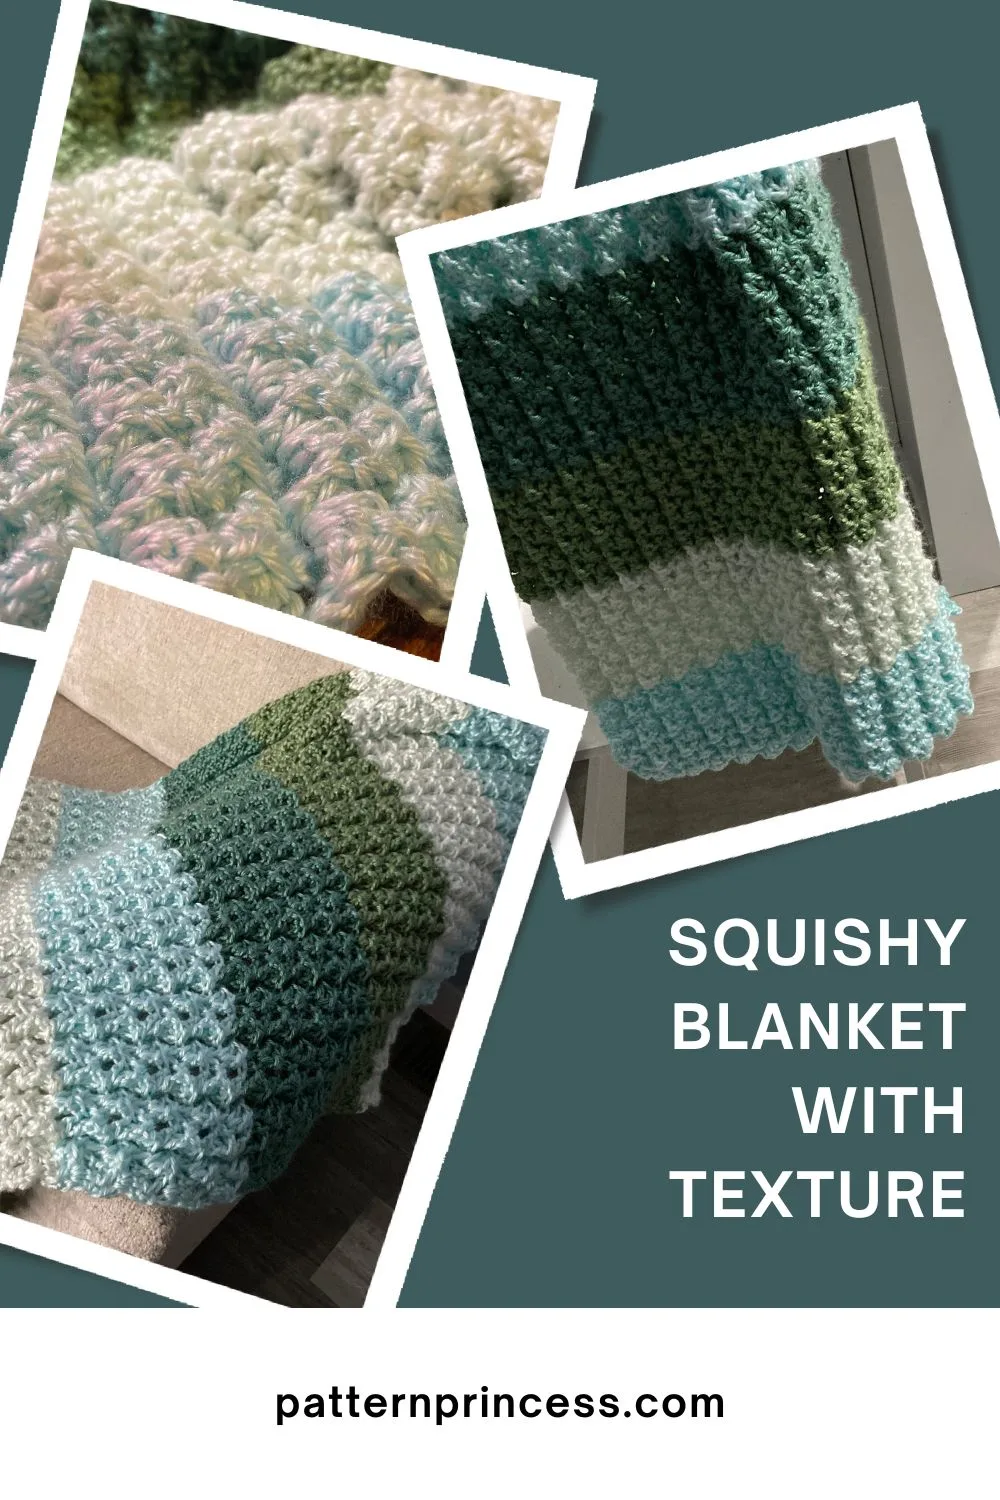 Squishy Blanket with Texture